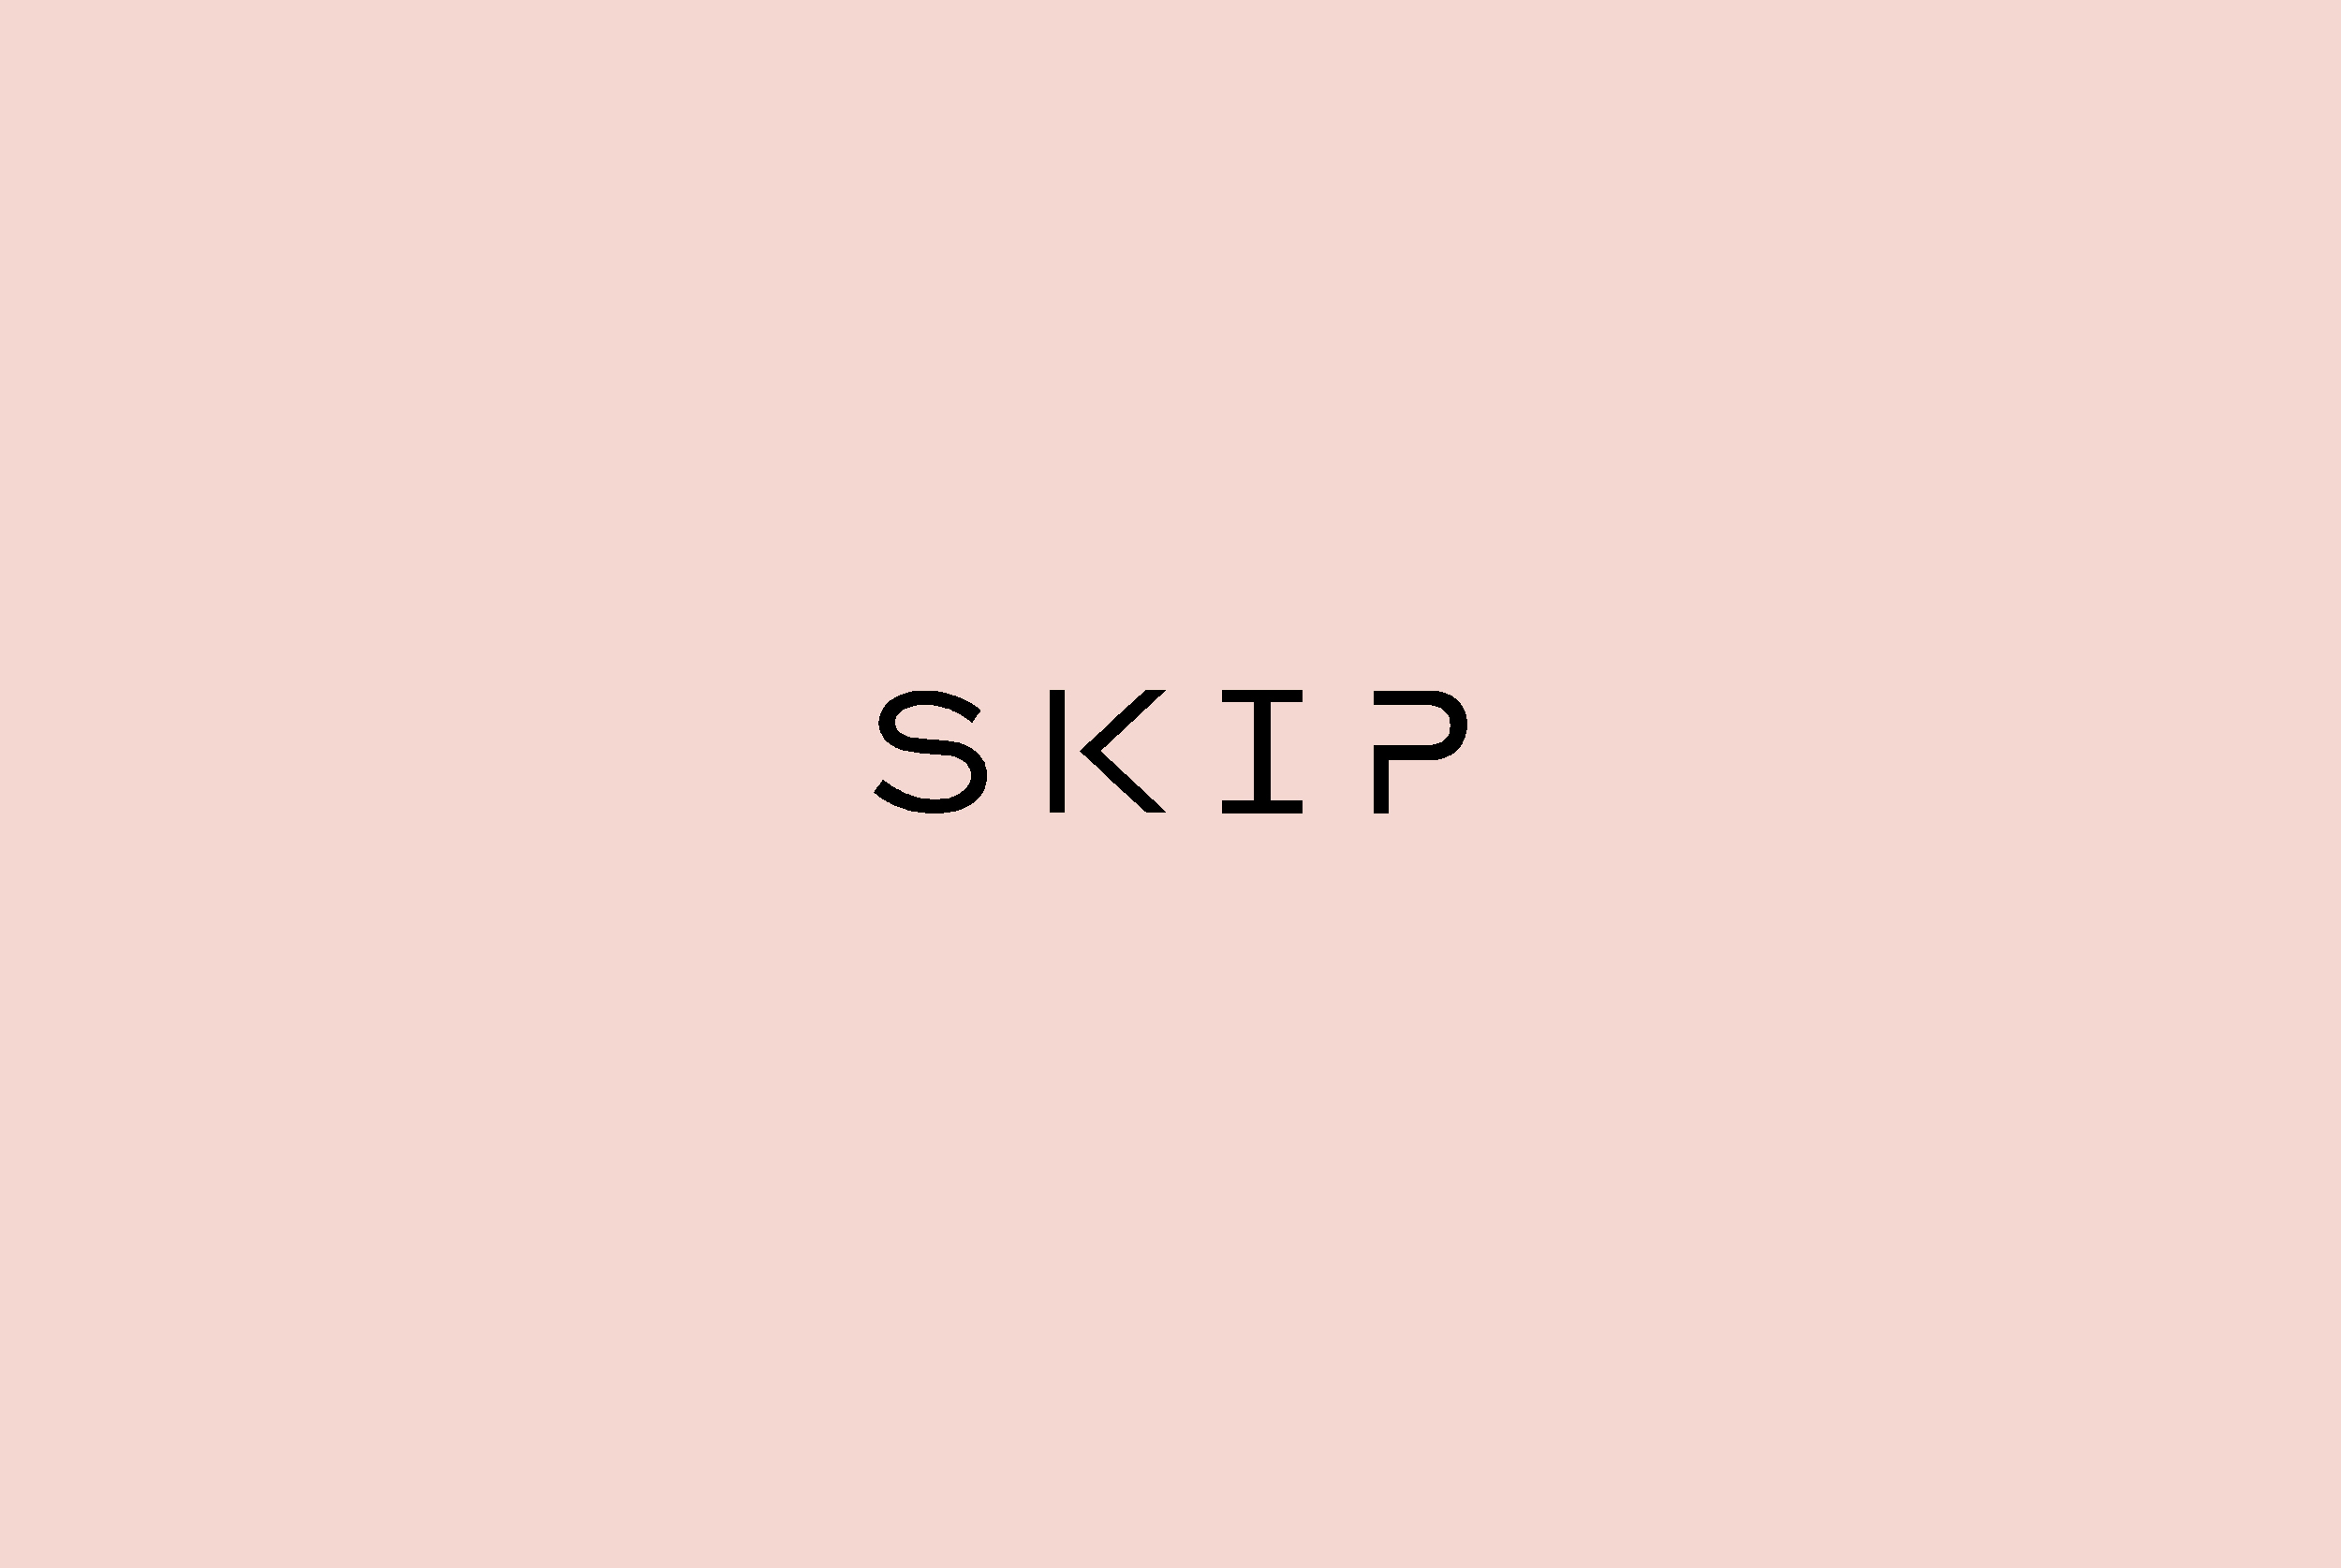 Heyho Co Design Designs the Visual Identity for Skip Clothing